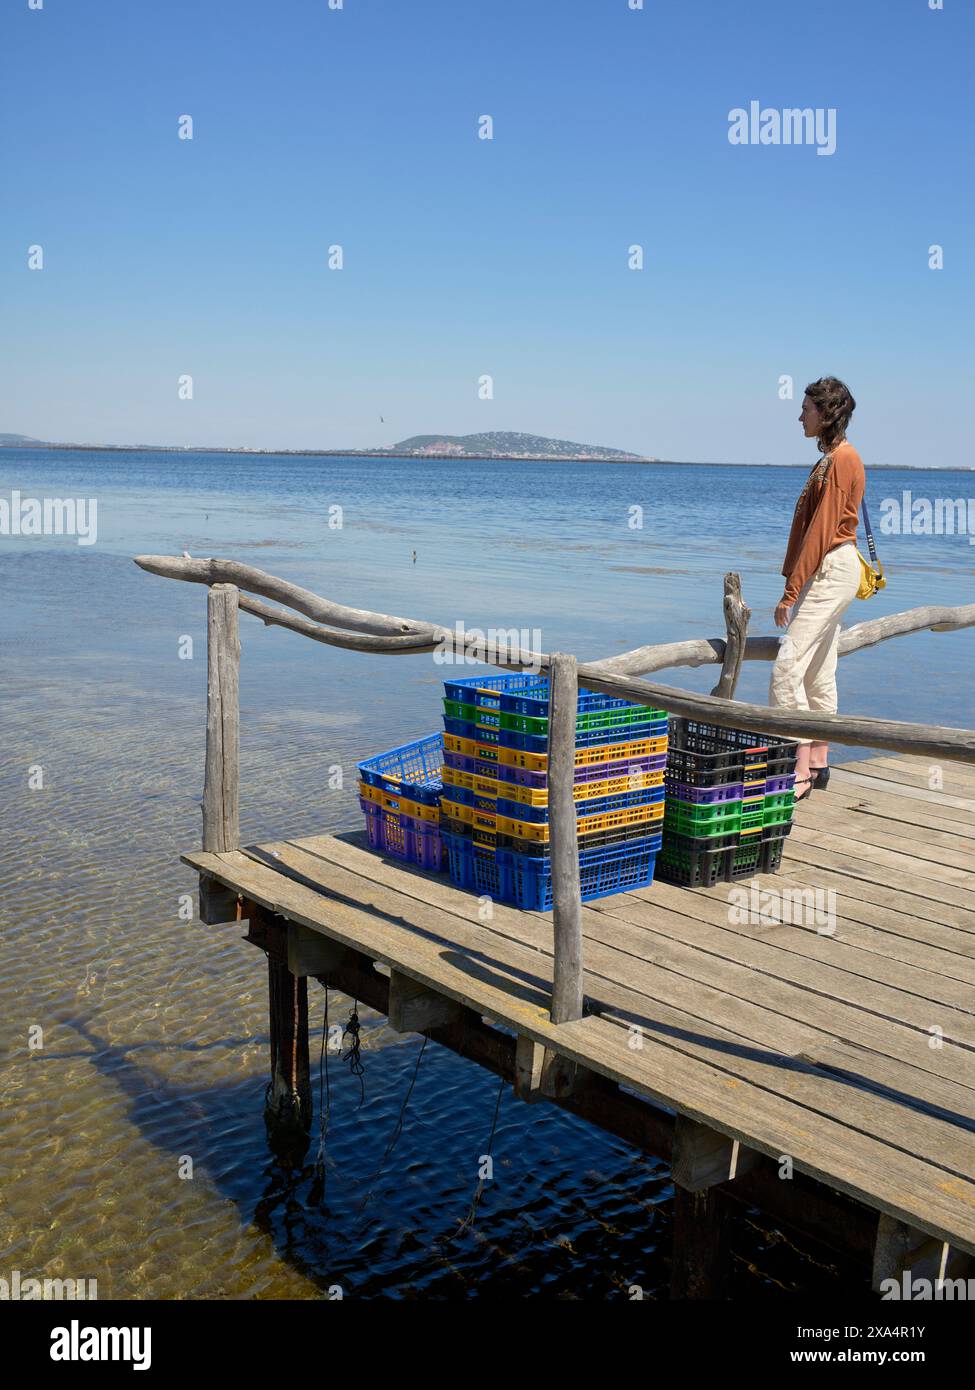 A person stands on a wooden pier by calm blue waters, gazing towards the horizon with colorful crates stacked nearby. Stock Photo